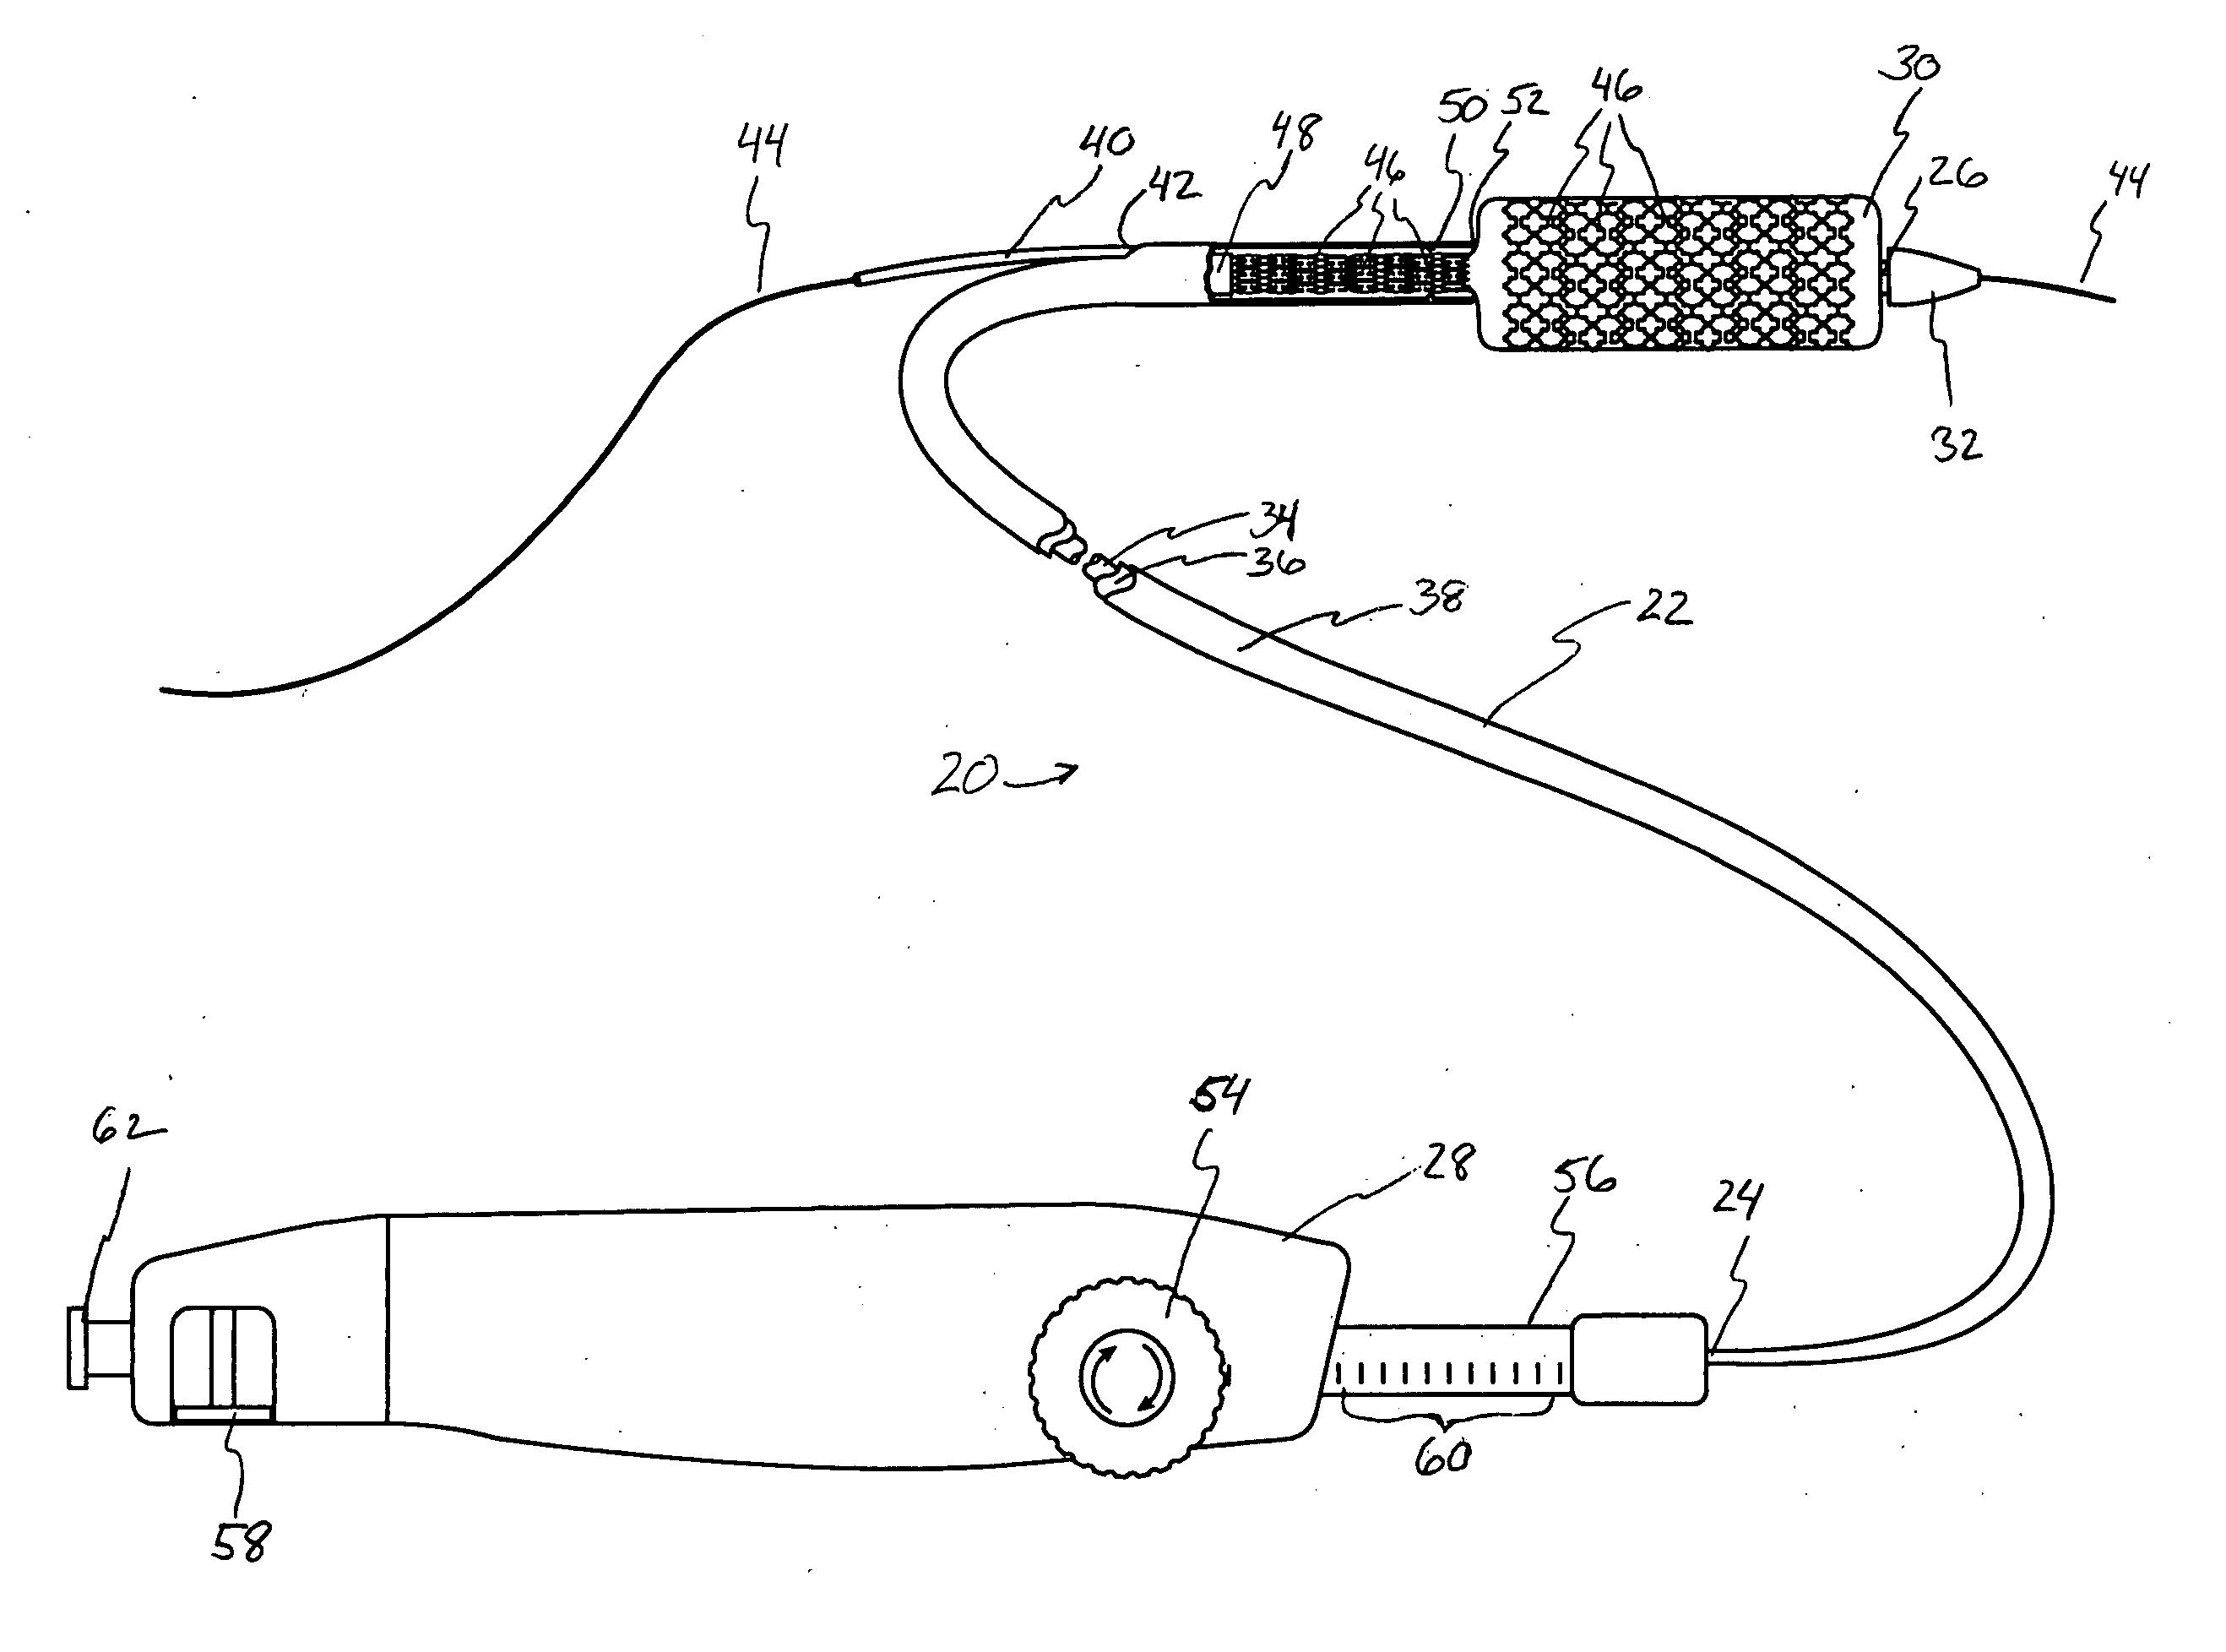 Devices and methods for controlling and indicating the length of an interventional element